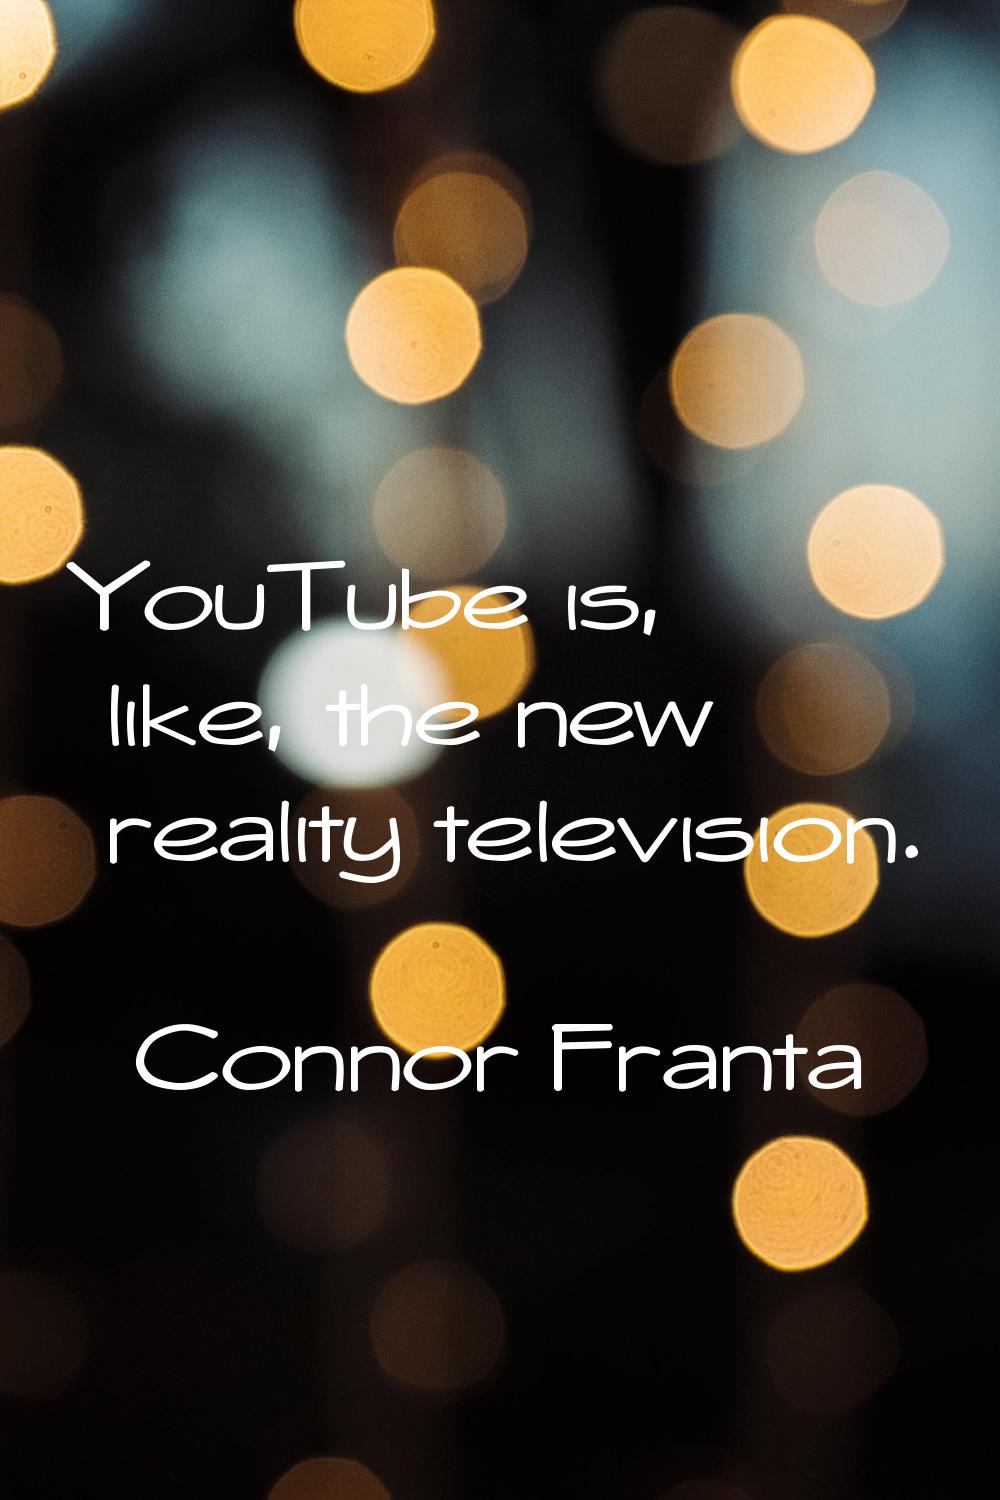 YouTube is, like, the new reality television.